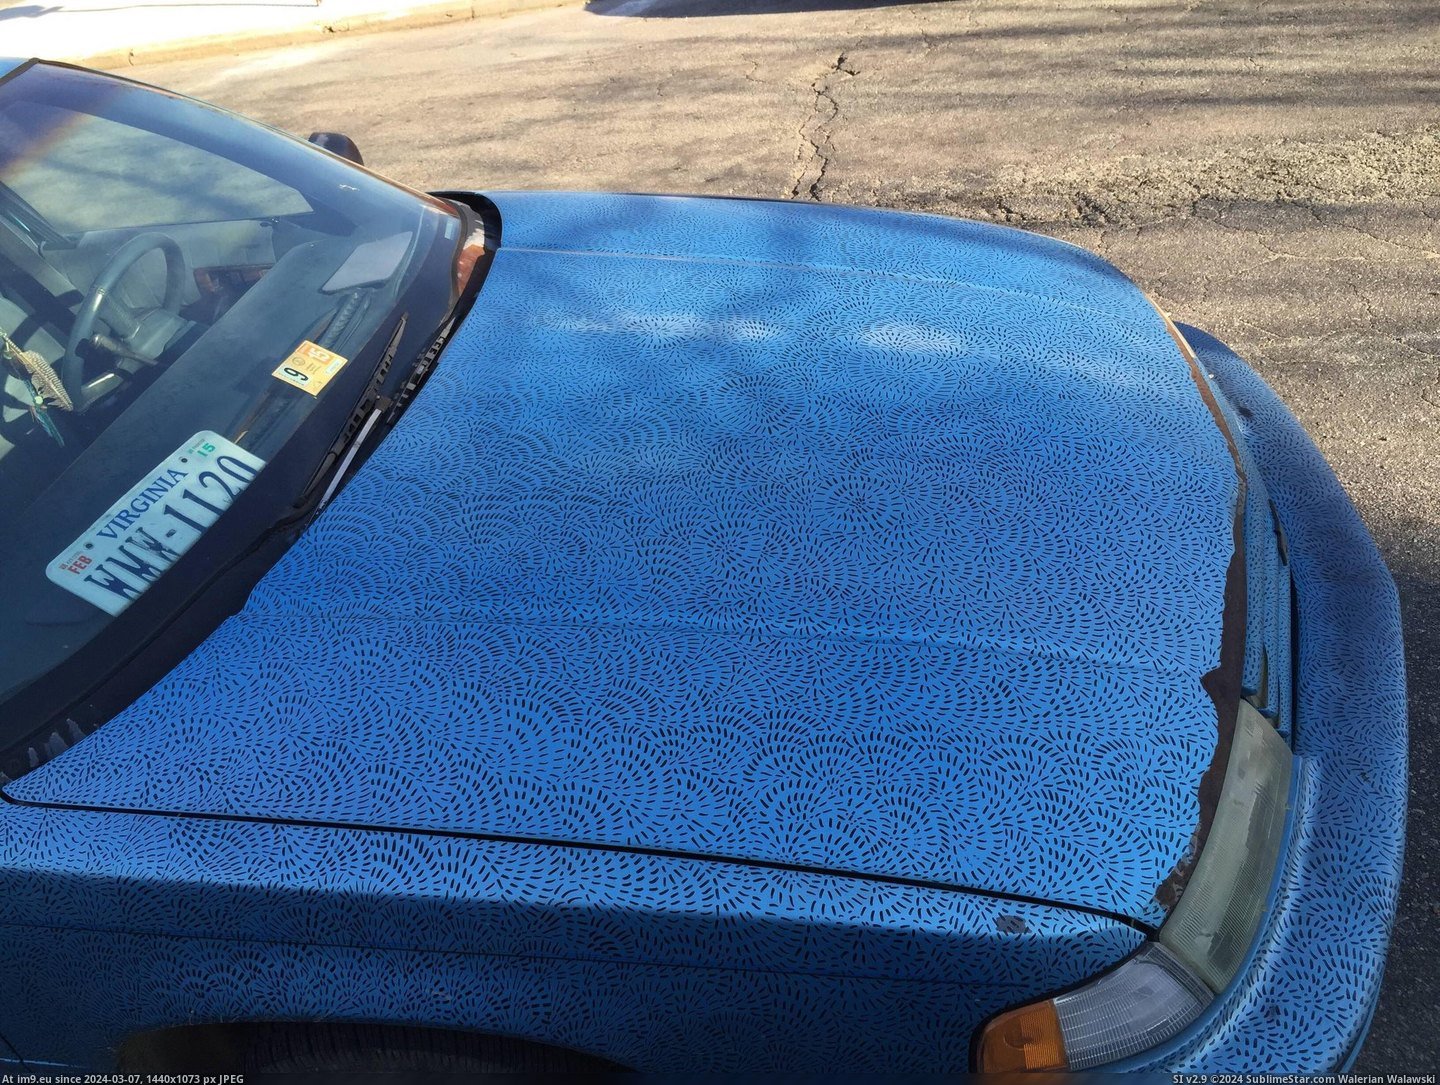 #Tiny #Entire #Sharpie #Markings #Car #Covered [Mildlyinteresting] The ENTIRE car was covered by tiny sharpie markings. Pic. (Obraz z album My r/MILDLYINTERESTING favs))